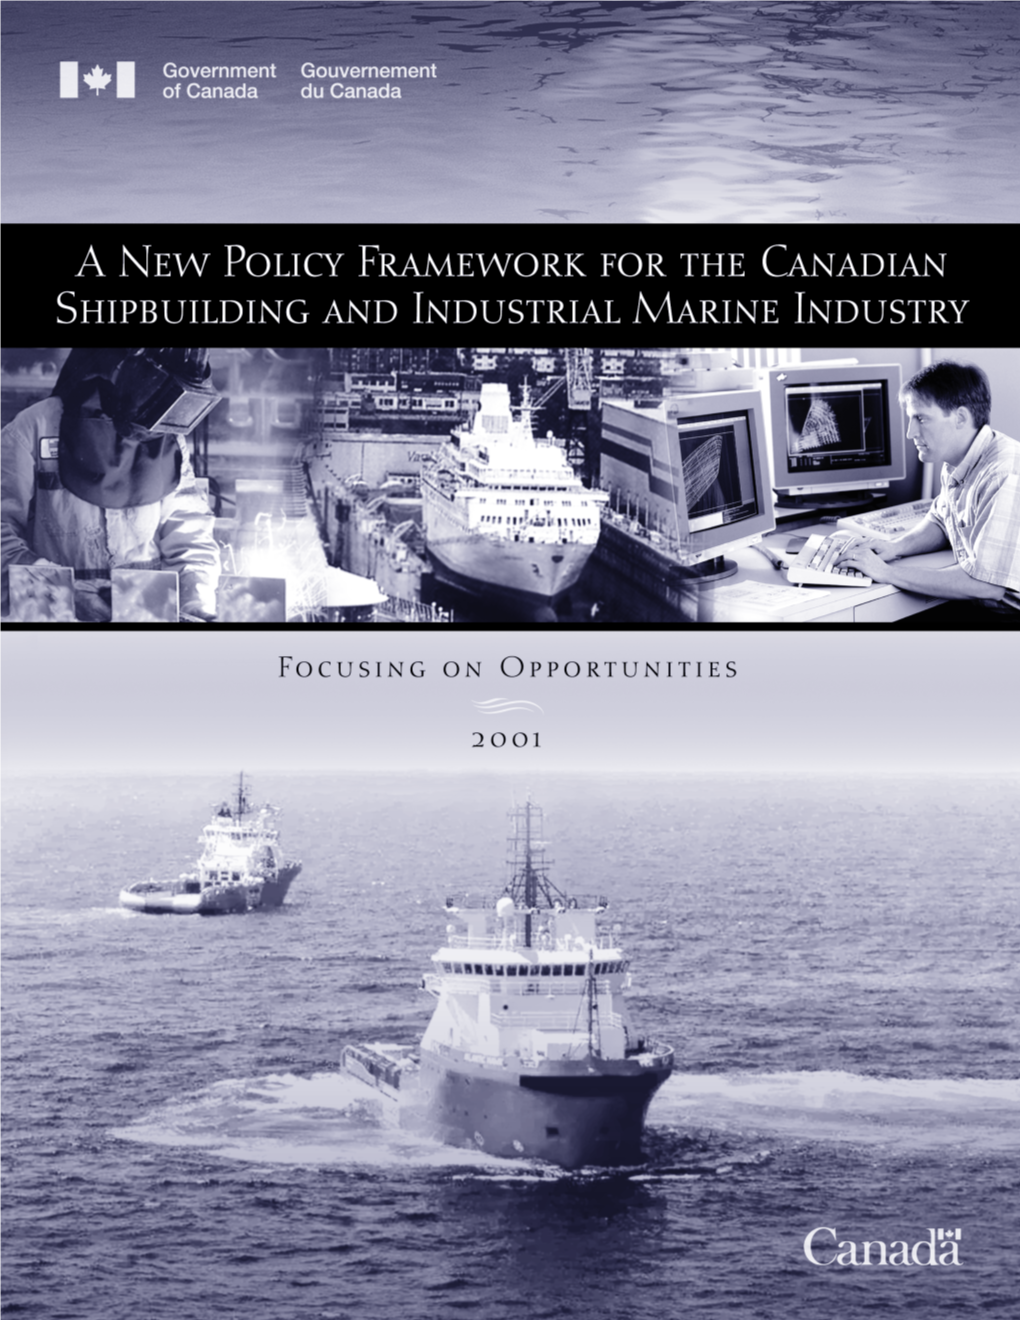 A New Policy Framework for the Canadian Shipbuilding and Industrial Marine Industry